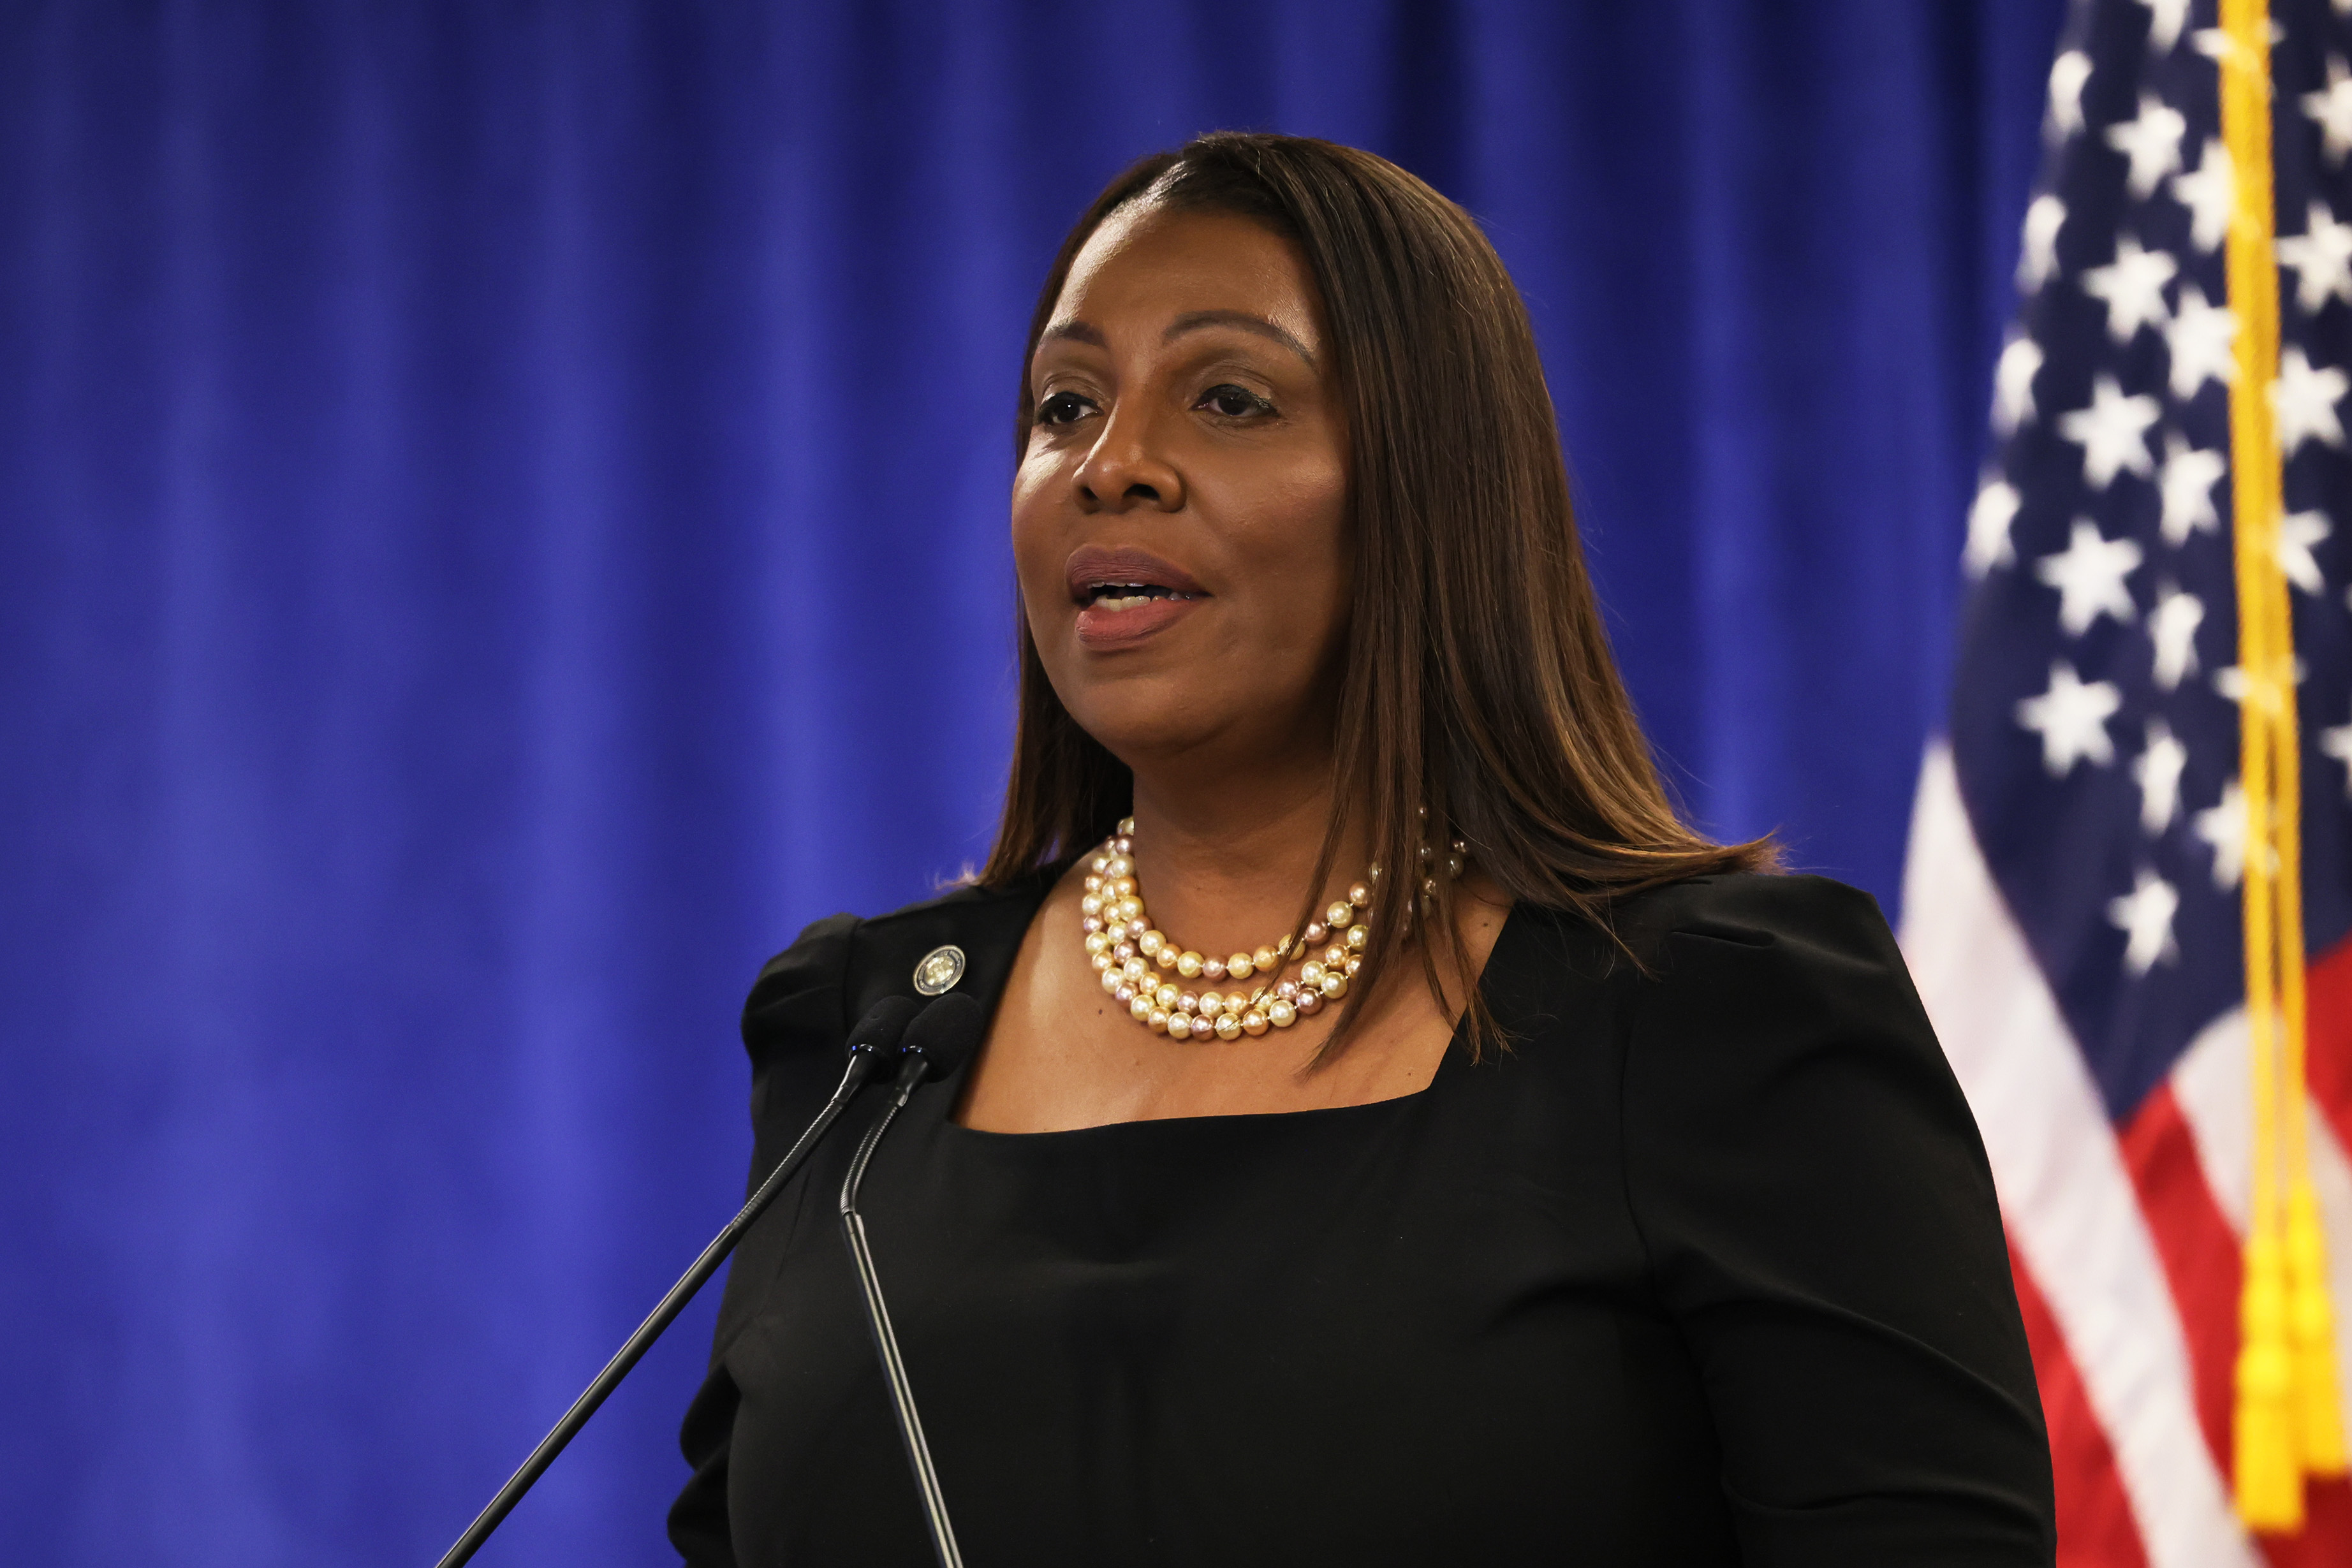 Letitia James calls for further action against the NRA